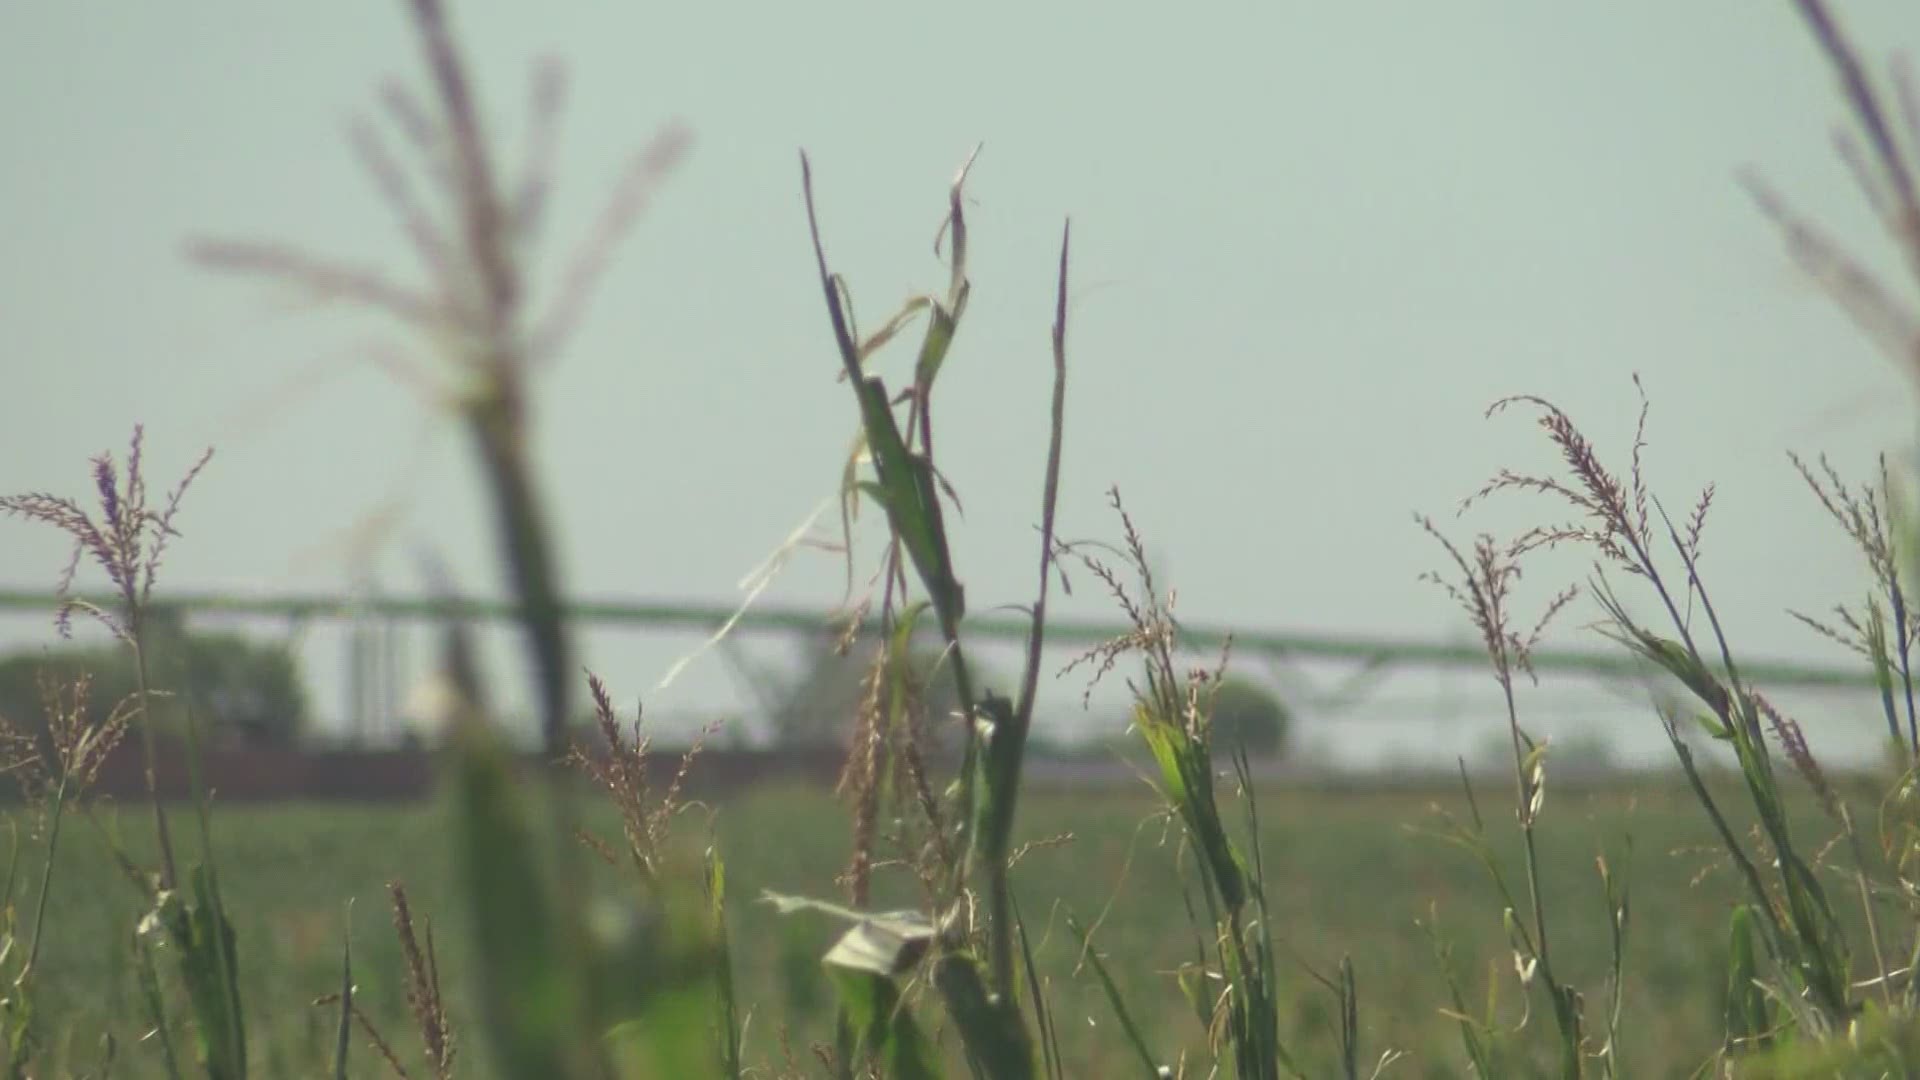 Local 5's Matthew Judy reports on how producers across central Iowa have been affected by the destructive storm.